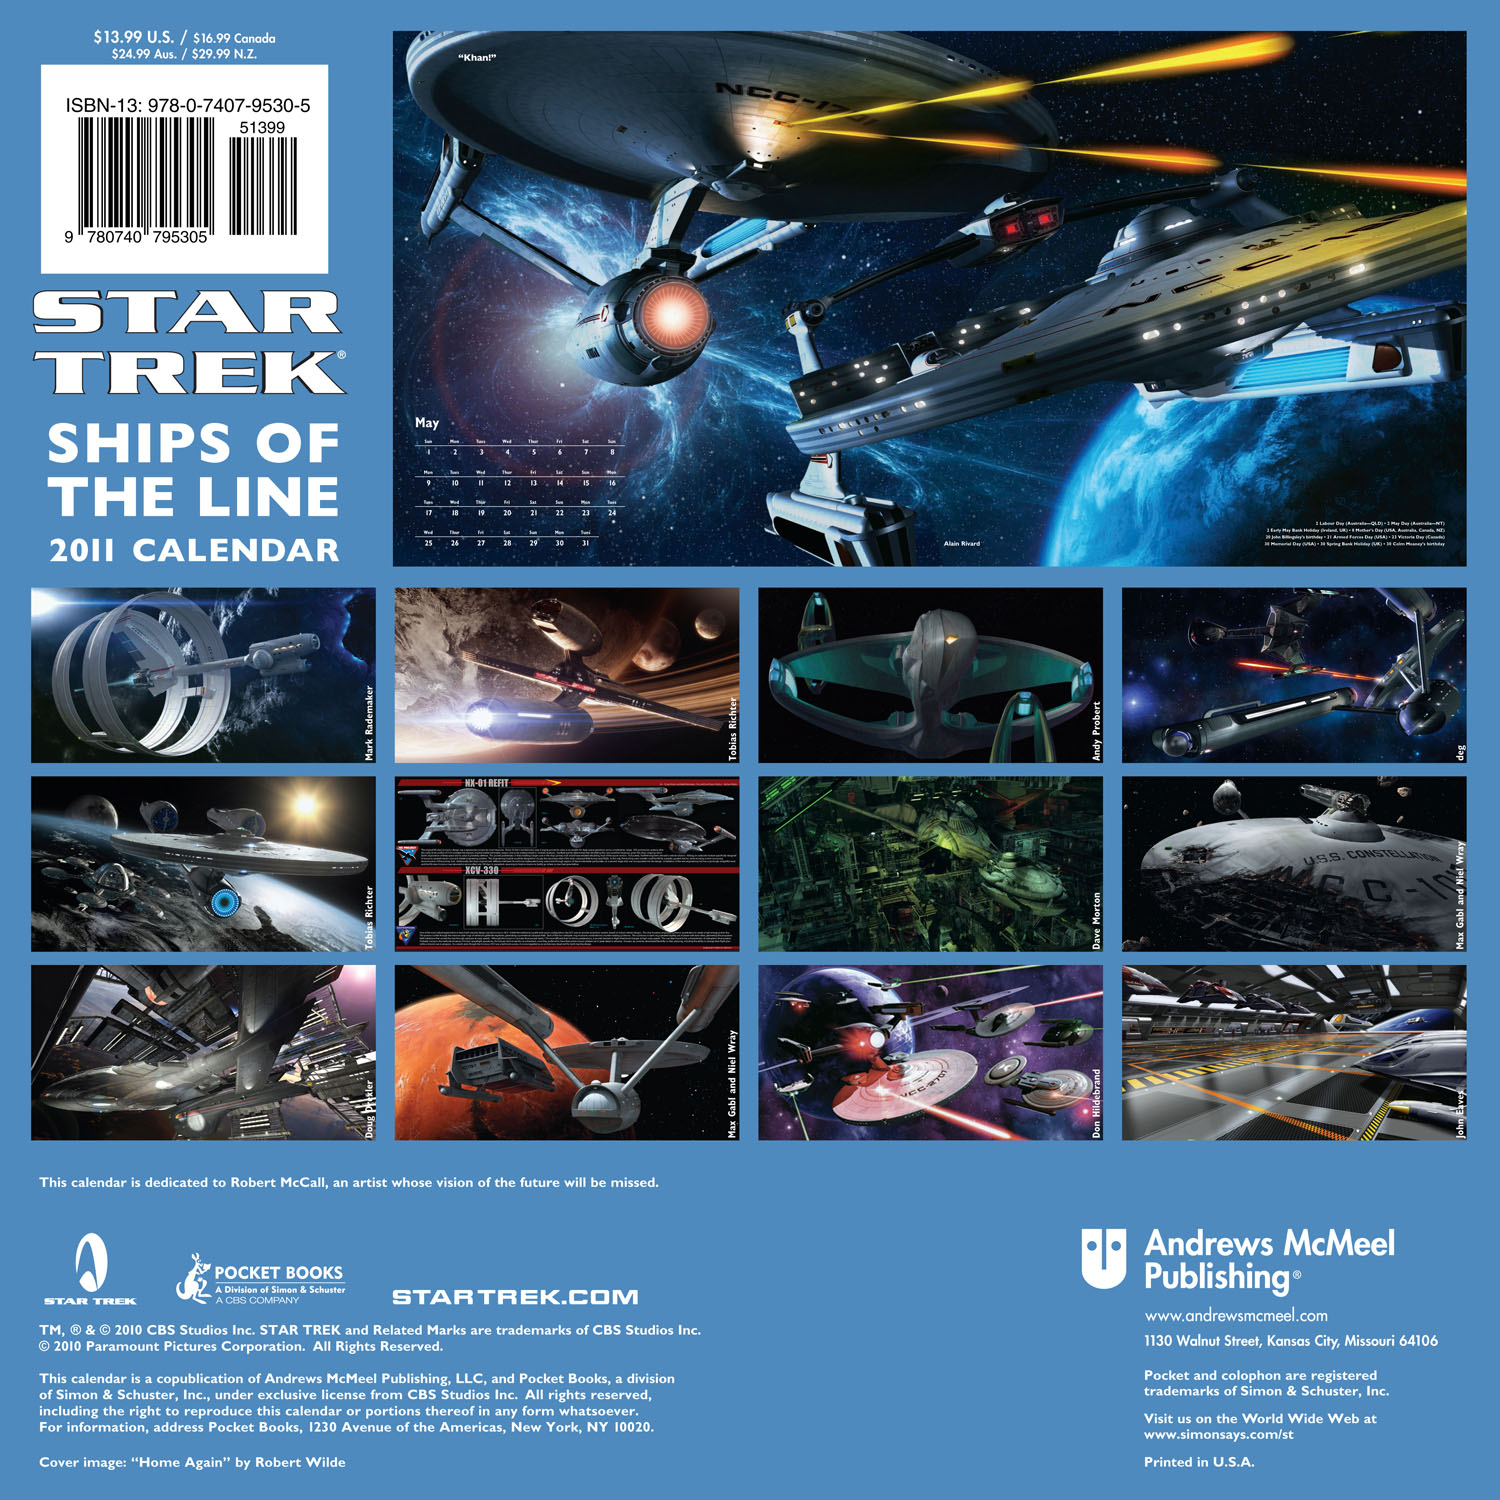 2011 Star Trek Ships Of The Line Calendar Available Now See Covers